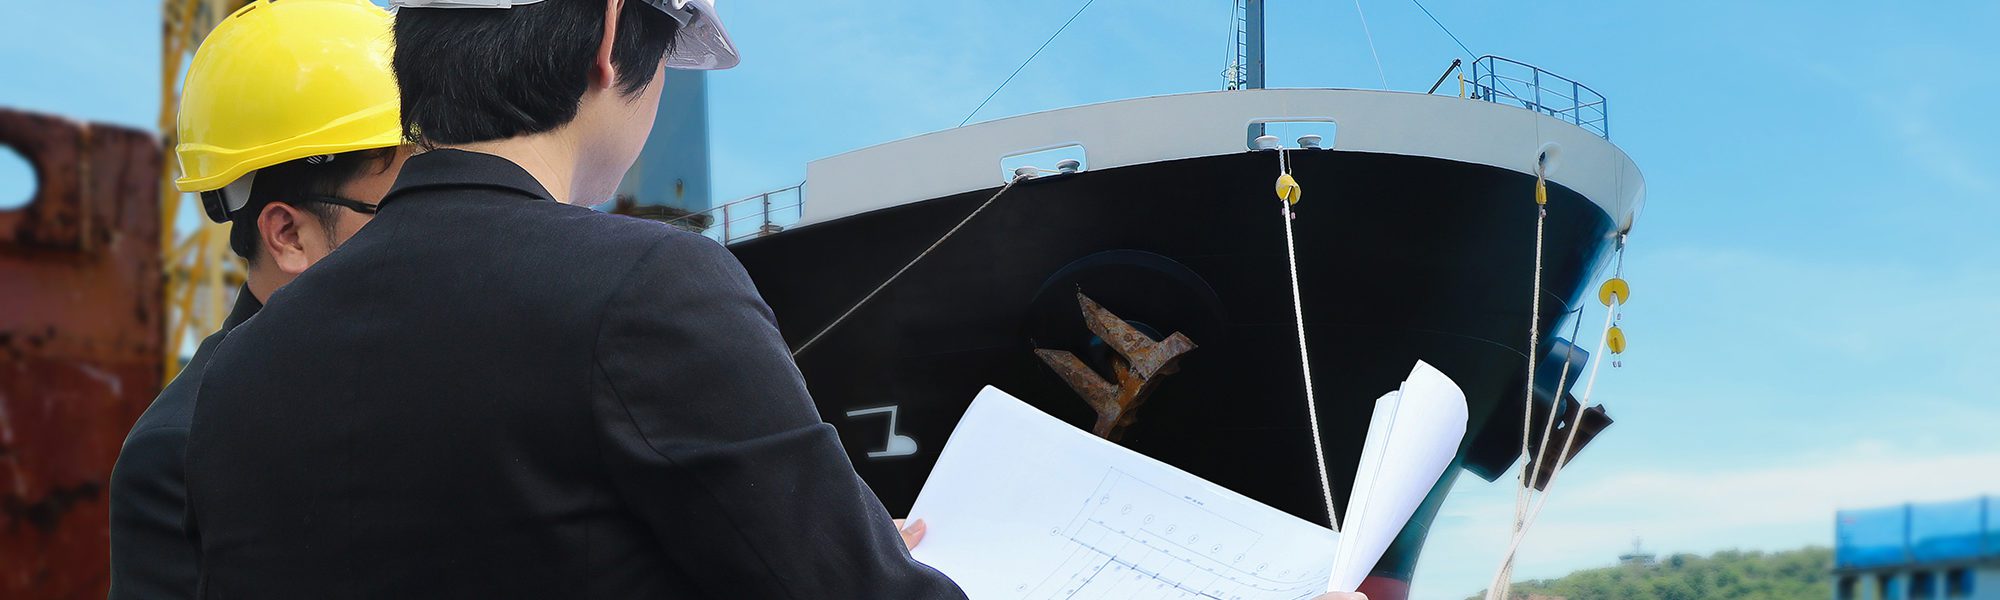 Two engineers reading a blueprint by front cargo ship or shipbuilding in shipyard background